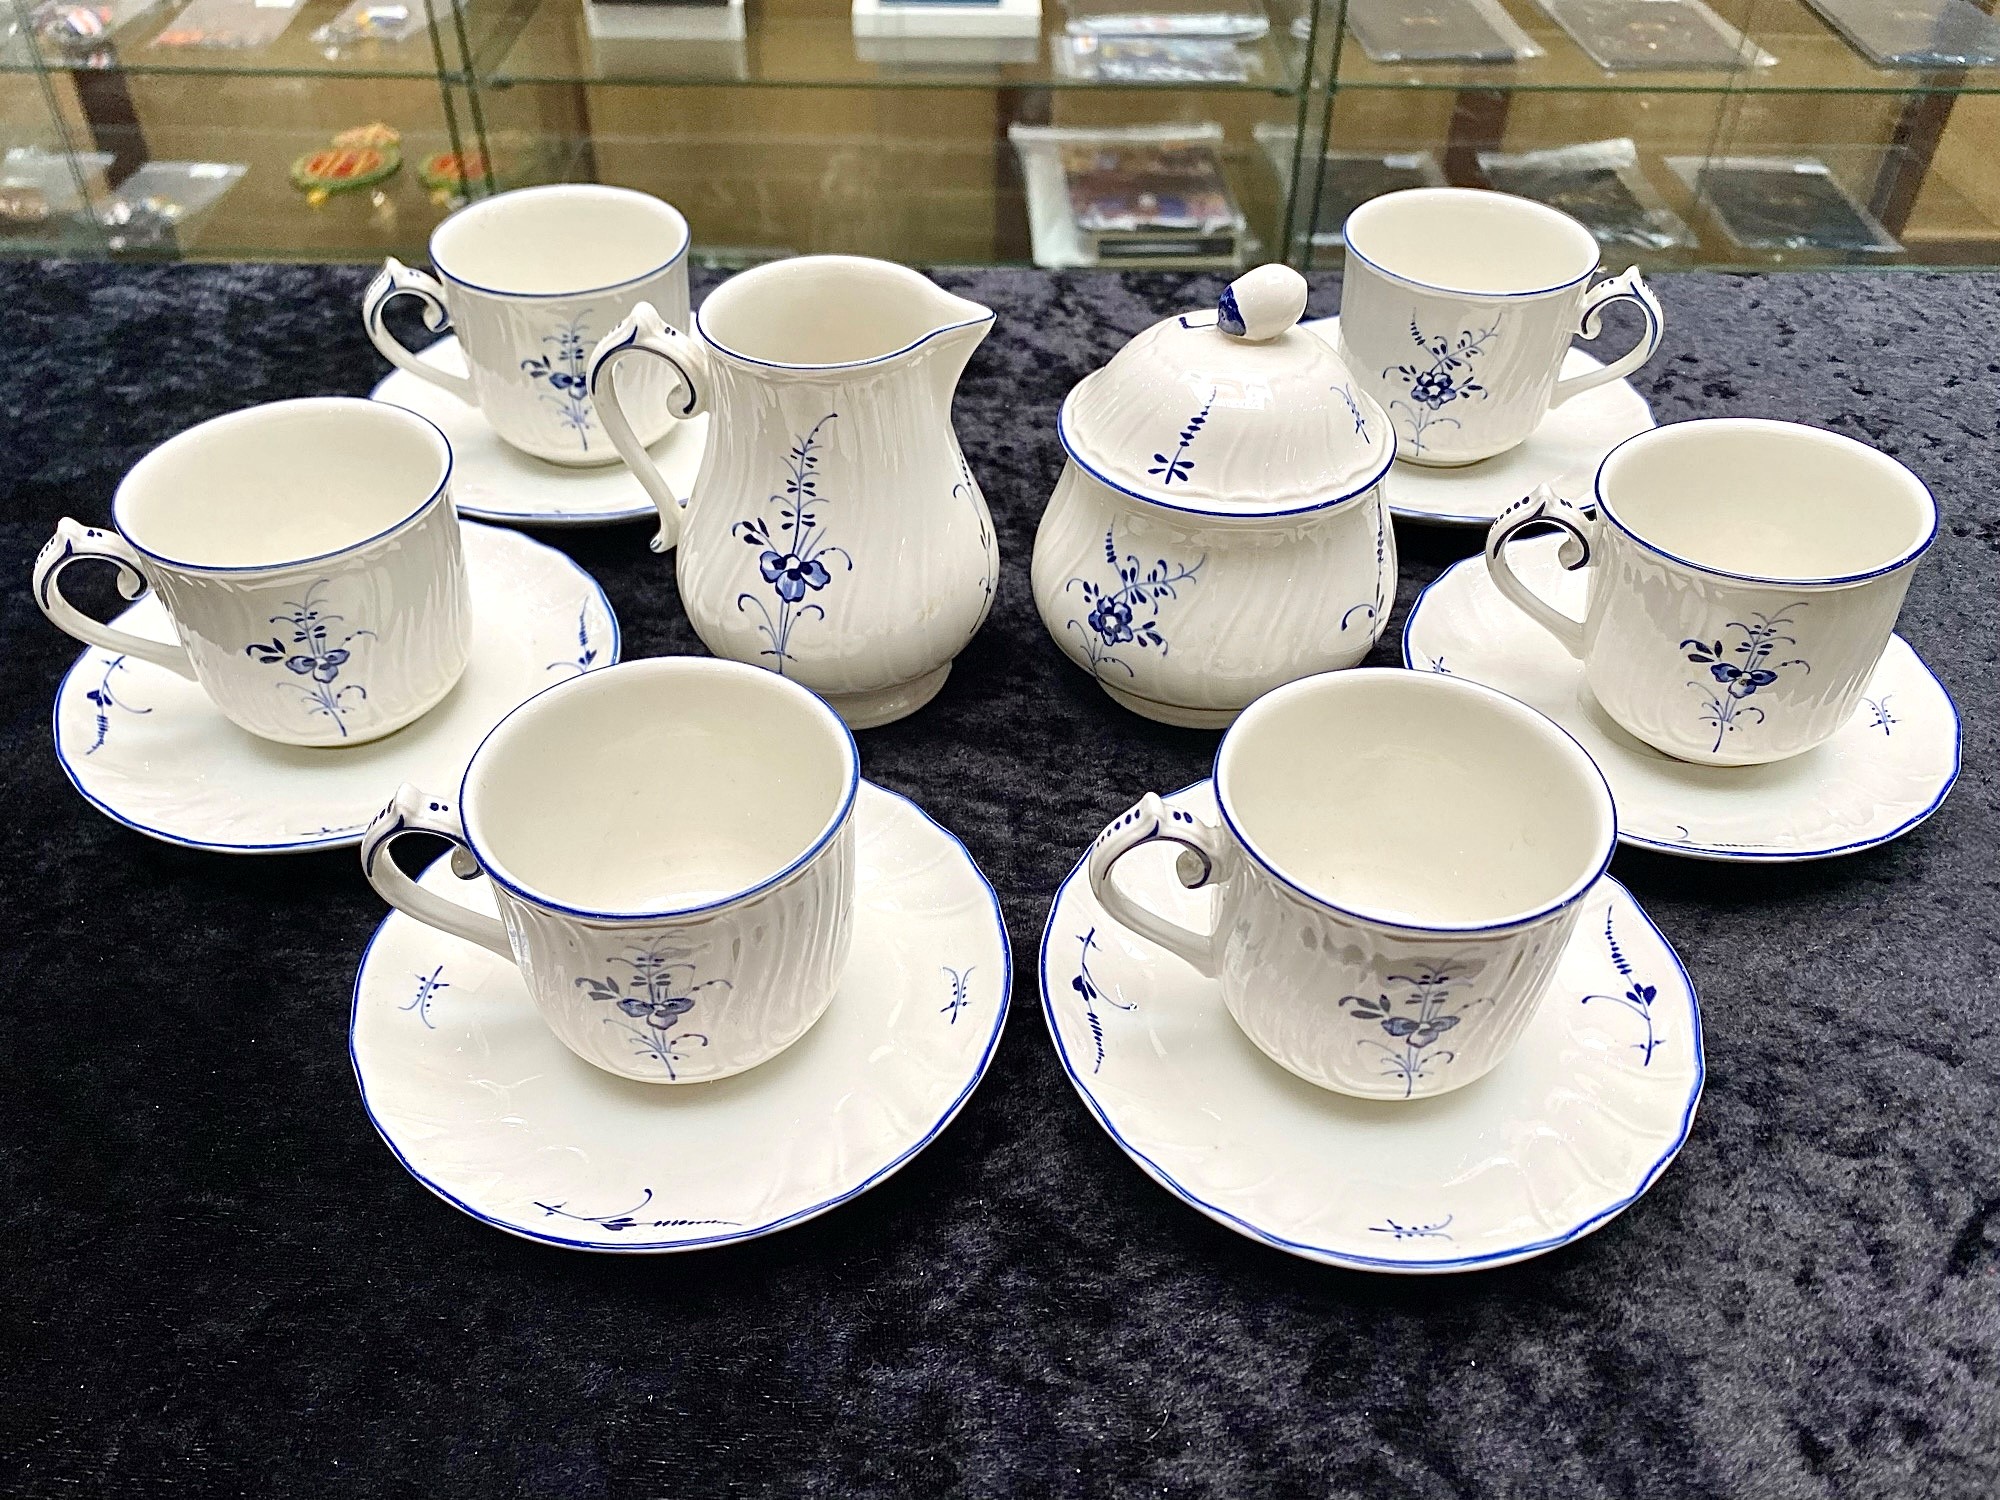 Villeroy & Boch Blue and White Teaset comprising 6 cups and saucers, milk jug and sugar bowl.